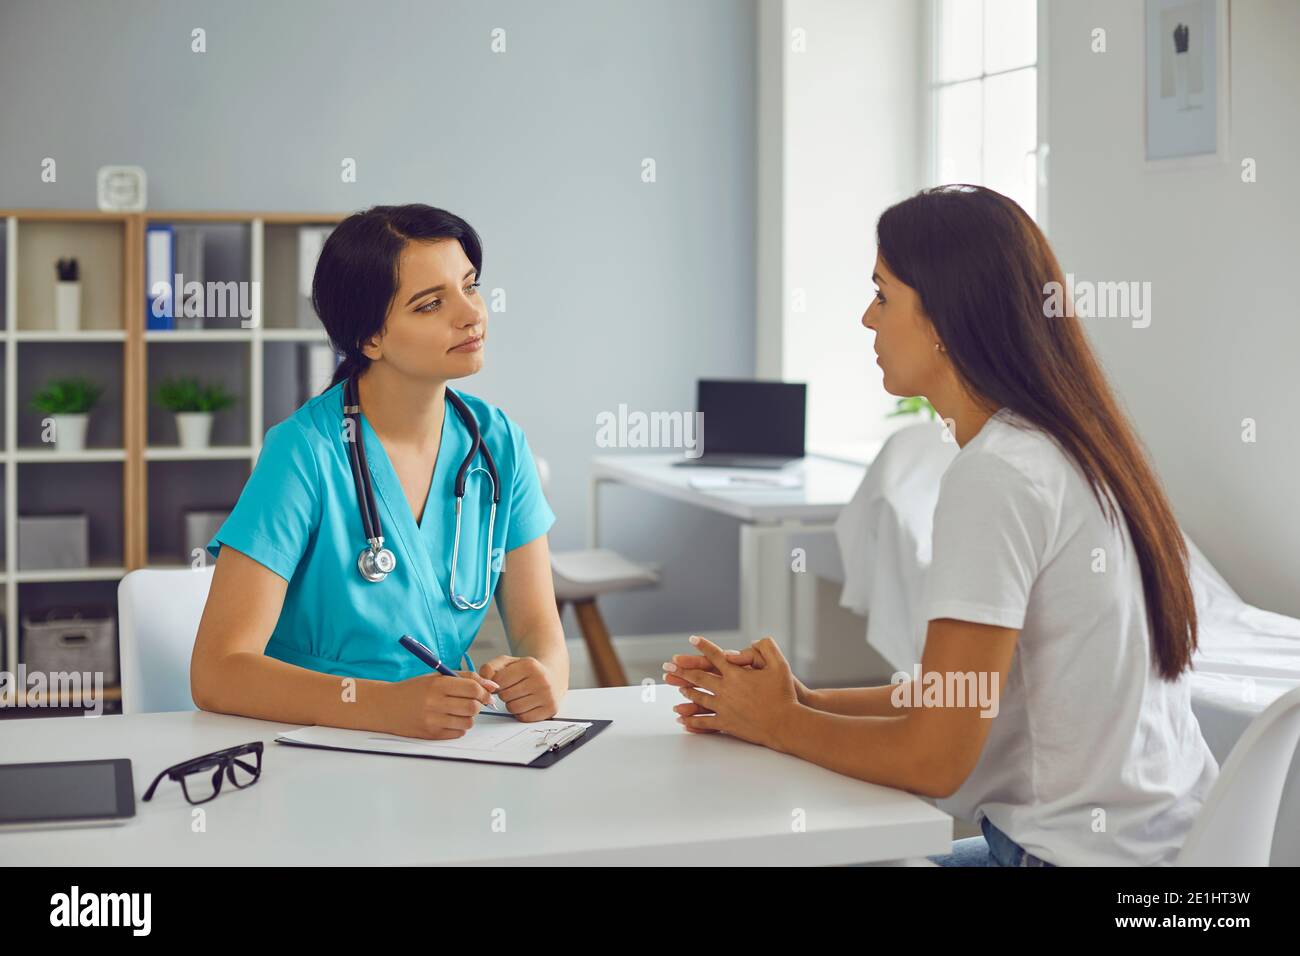 Young doctor therapist listening to woman patient in medical clinic Stock Photo